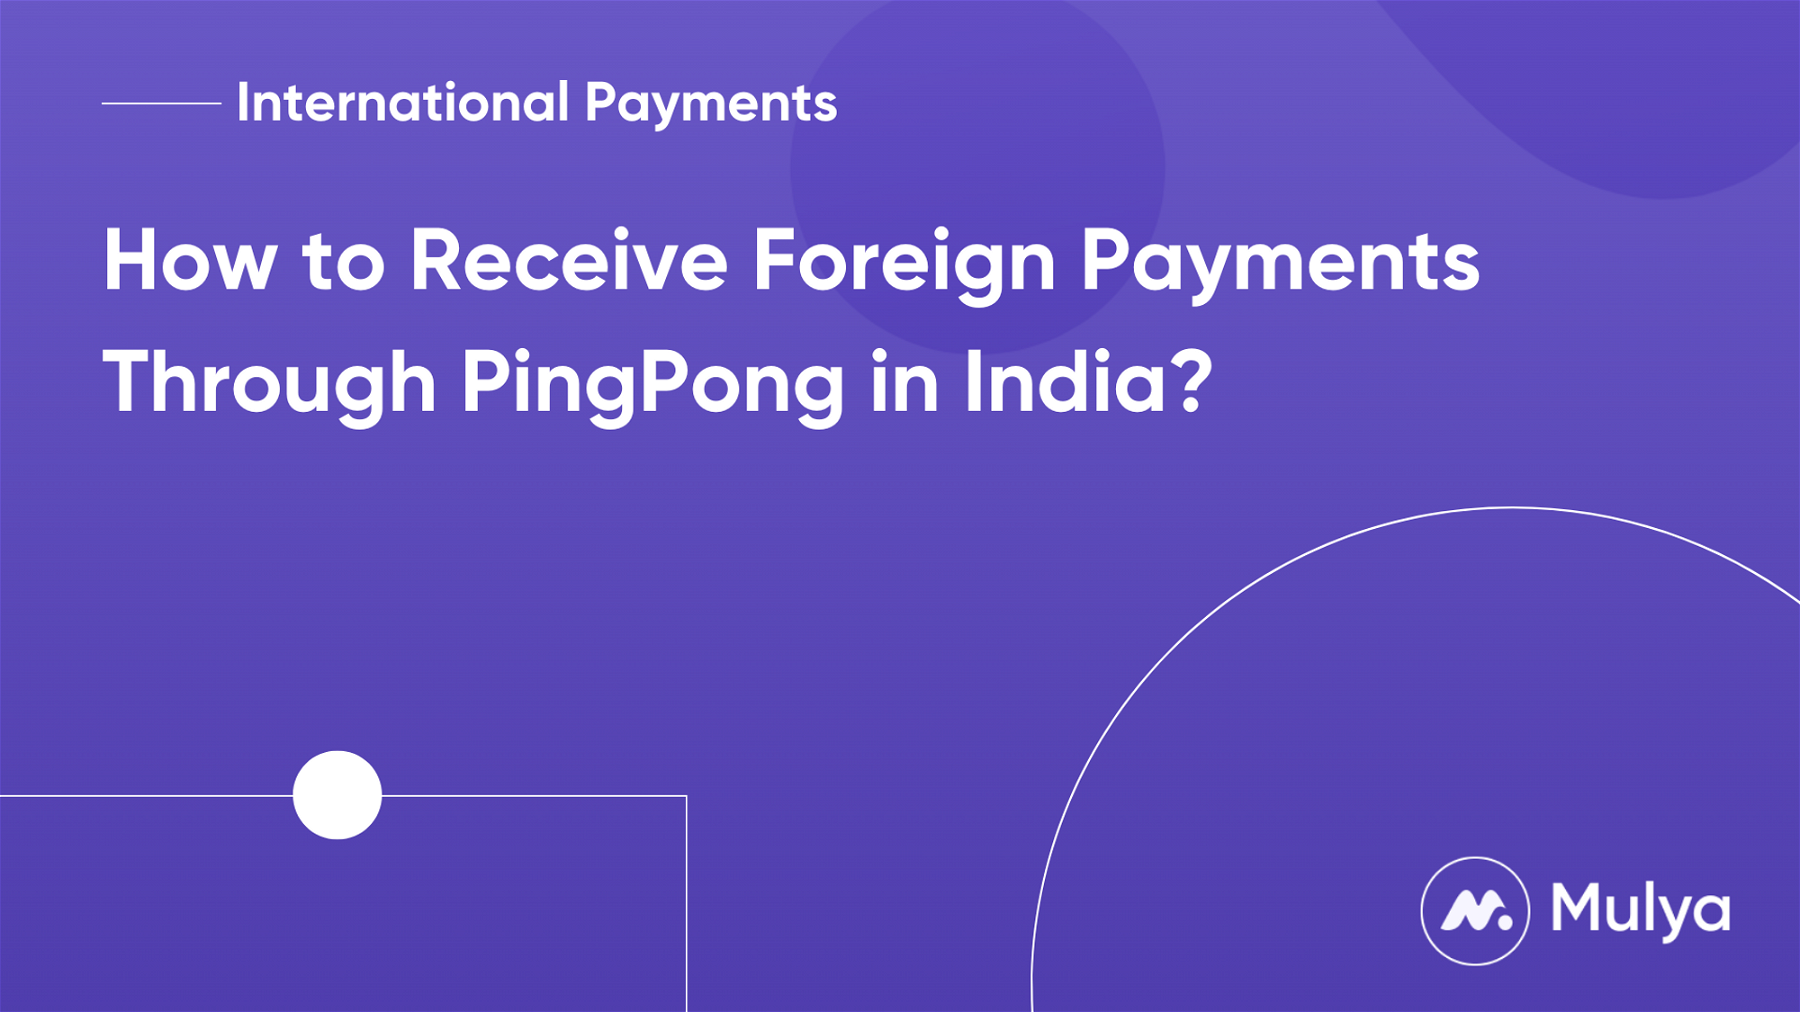 How to Receive Foreign Payments Through PingPong in India?